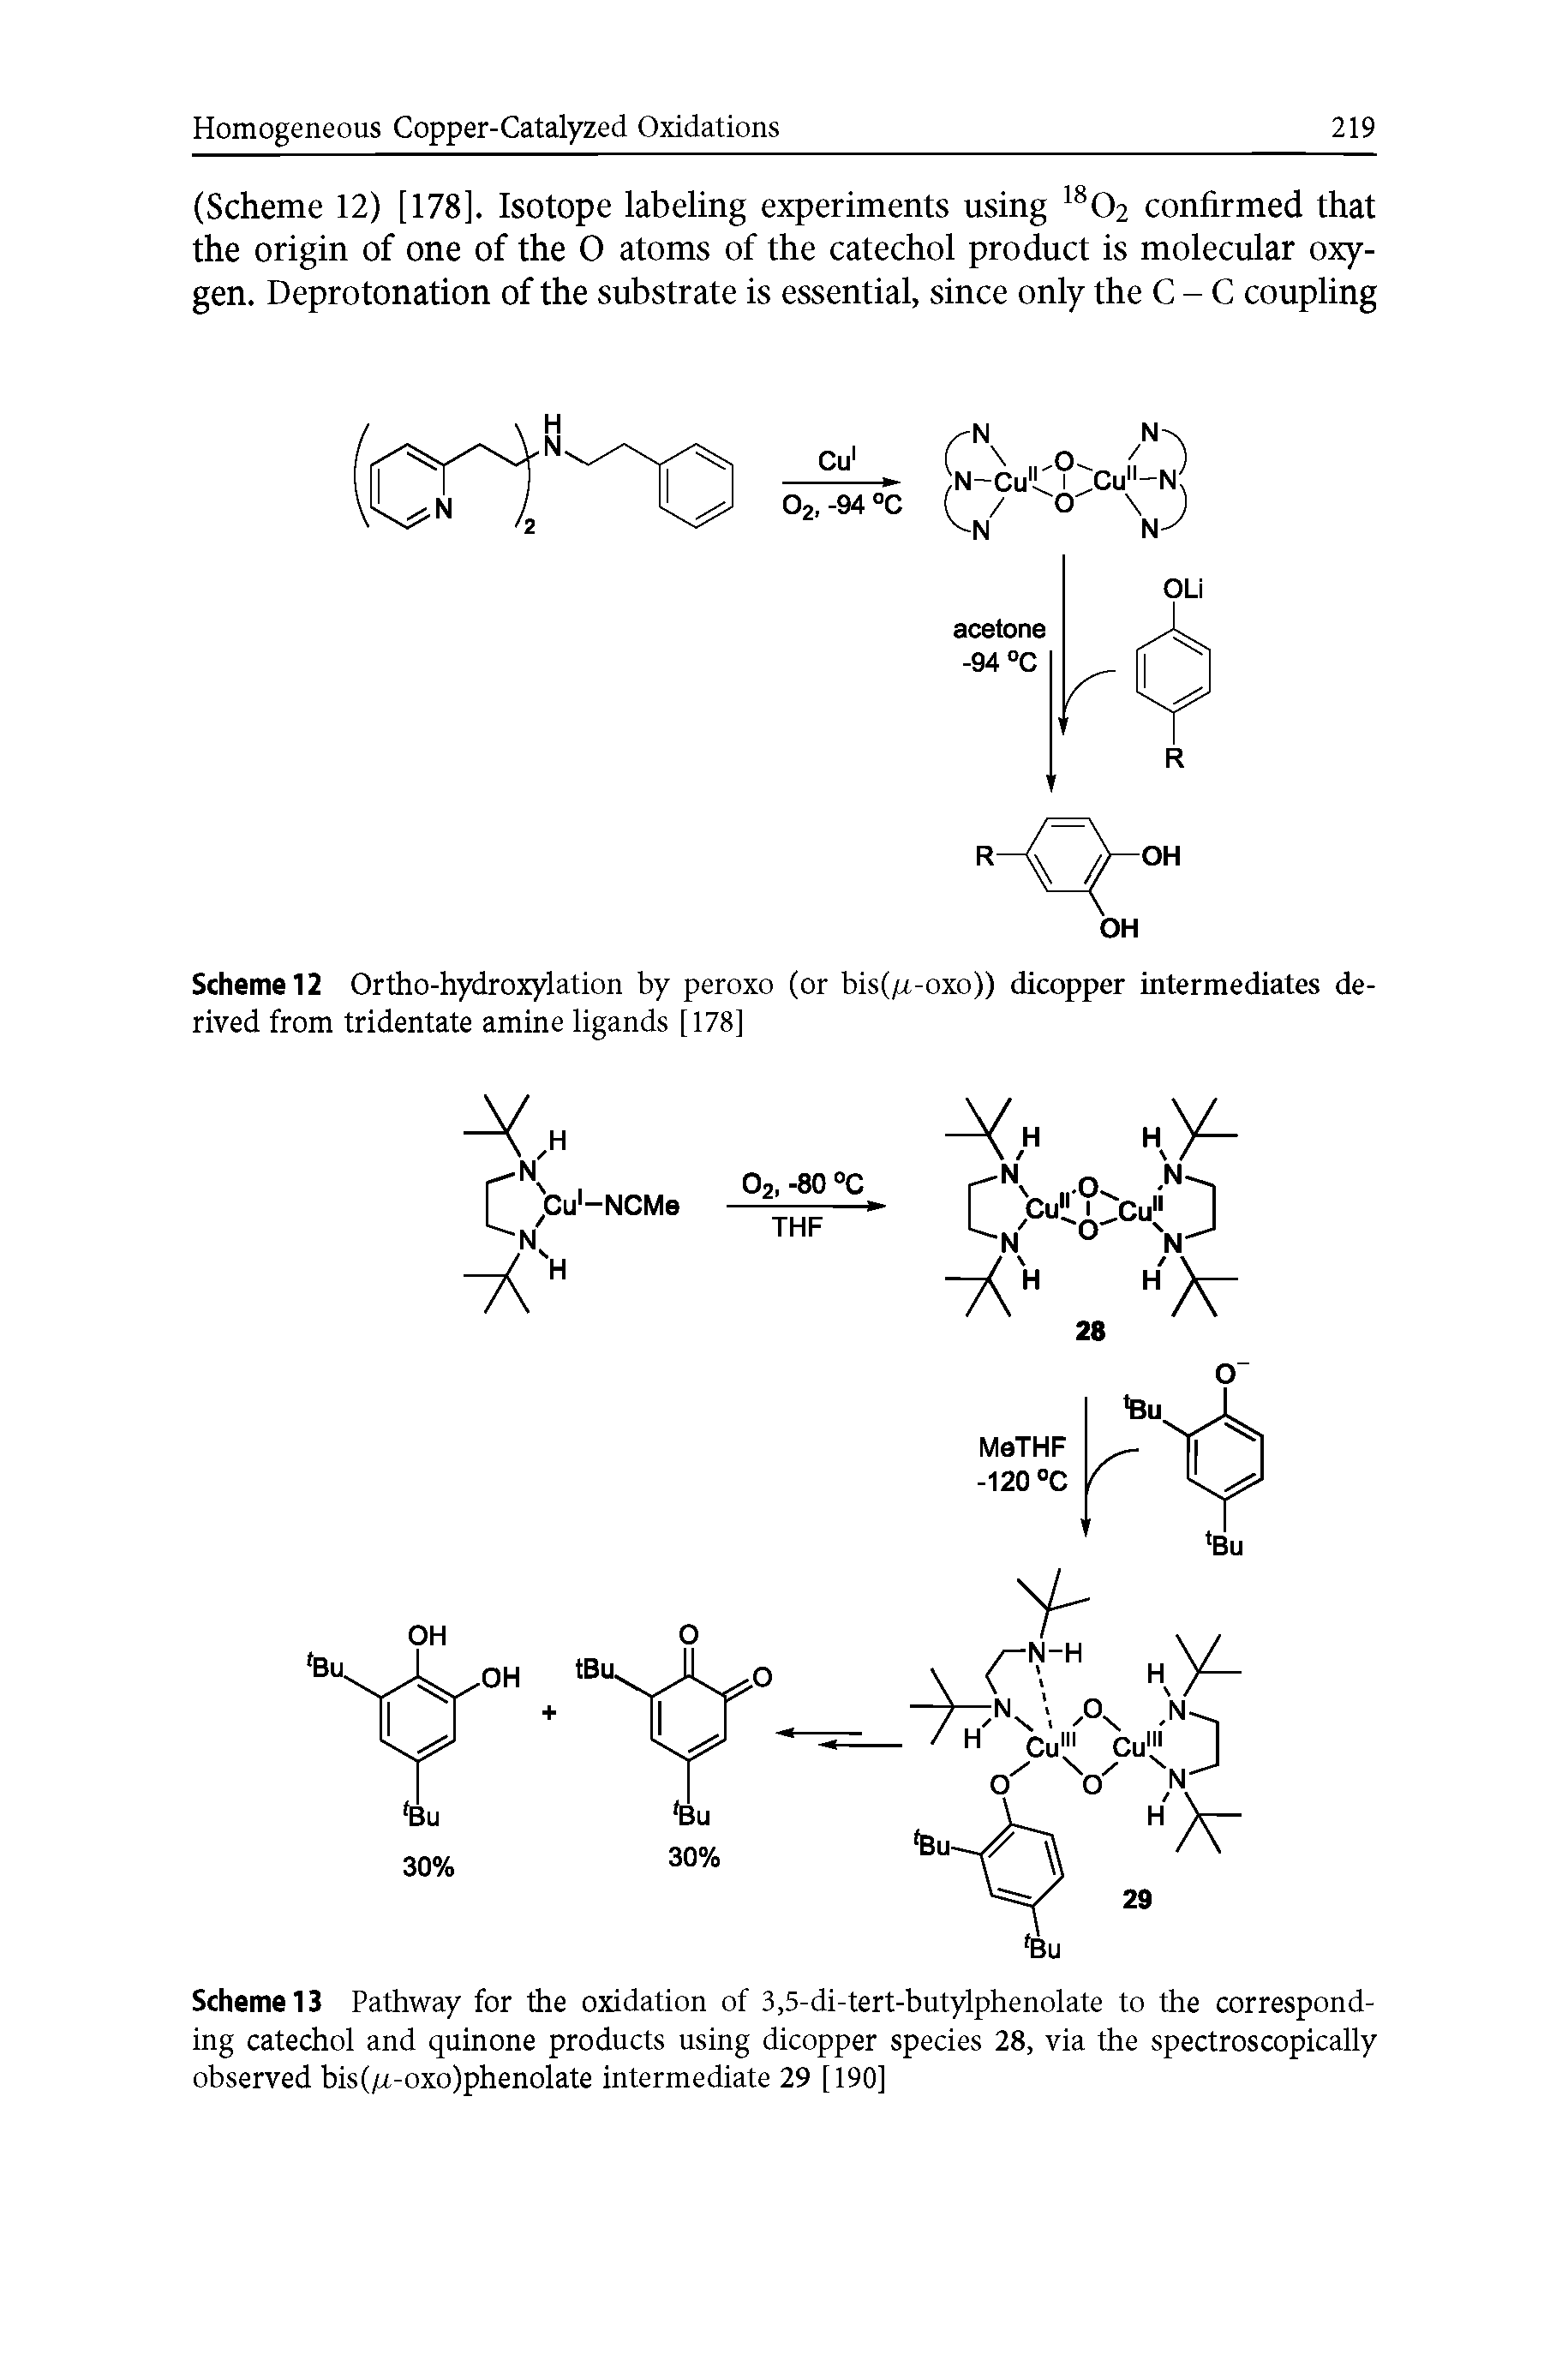 Scheme 12 Ortho-hydroxylation by peroxo (or bis(/x-oxo)) dicopper intermediates derived from tridentate amine ligands [178]...